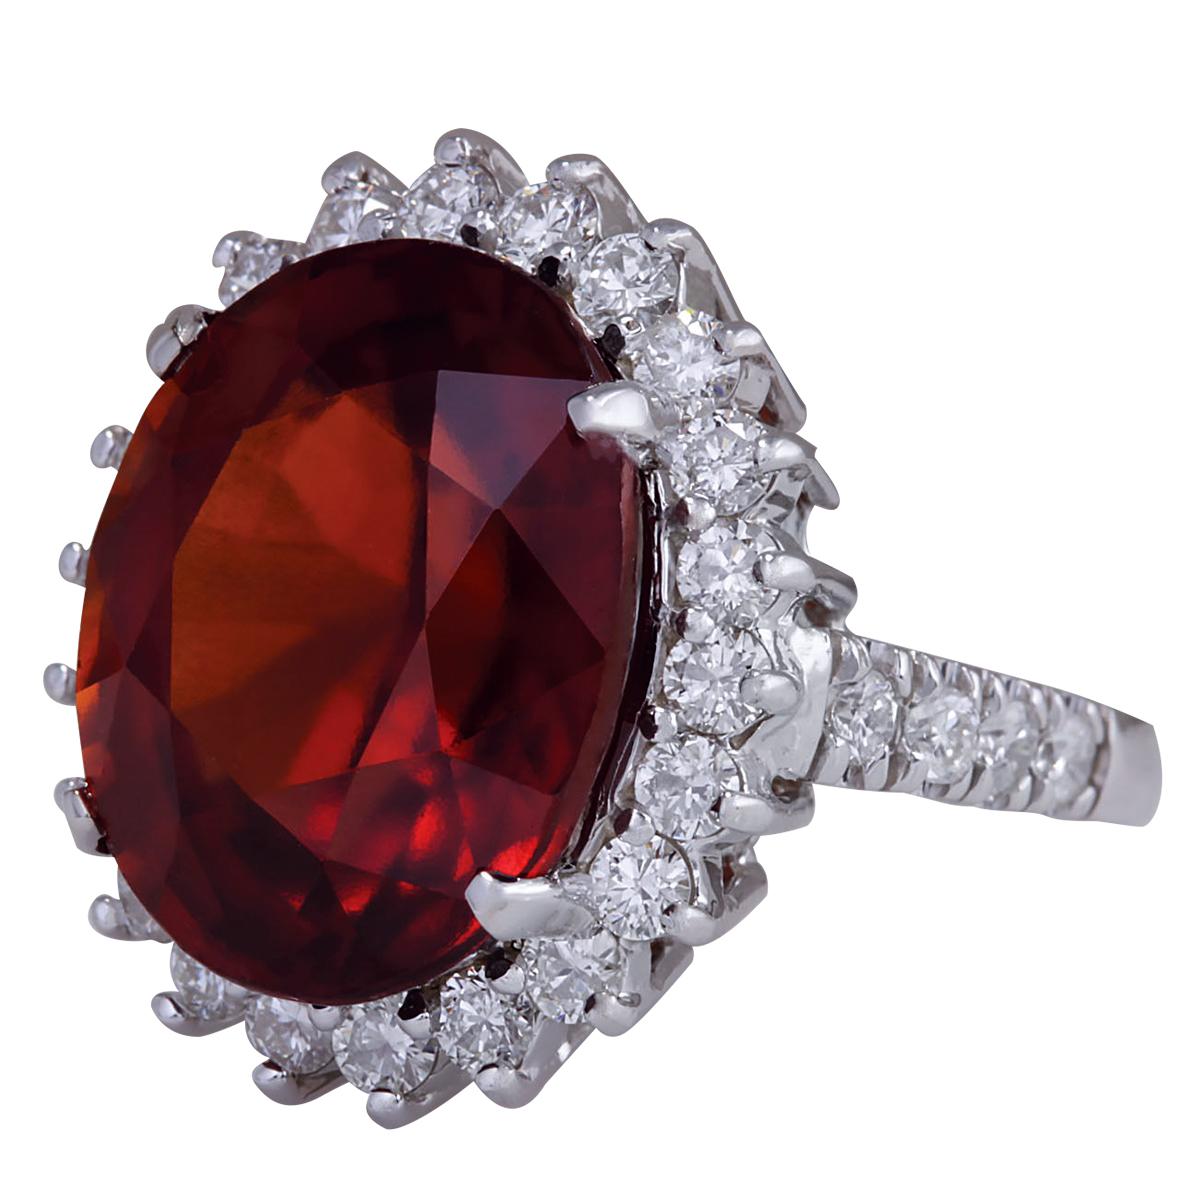 Introducing our opulent 14 Karat White Gold Diamond Ring featuring a stunning 18.43 Carat Garnet, stamped for authenticity. Crafted with meticulous care, this ring epitomizes elegance and luxury. Weighing 8.7 grams, it showcases a breathtaking